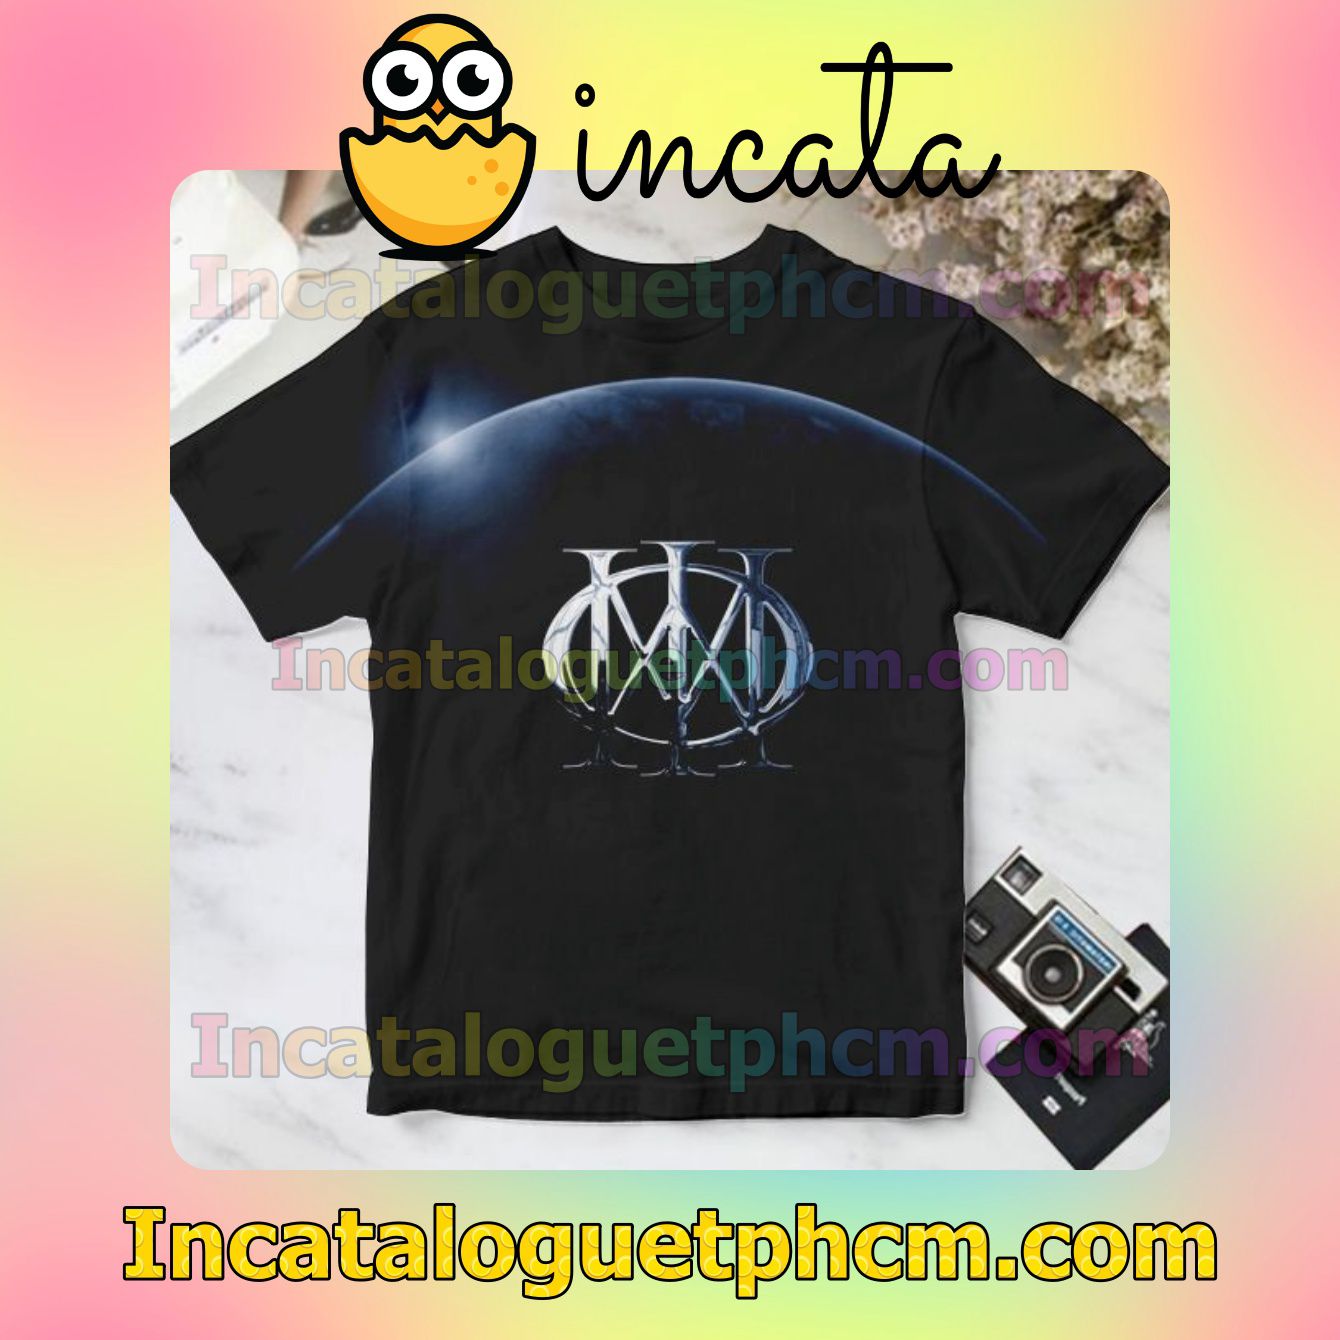 Dream Theater Self- Titled Album Cover Personalized Shirt